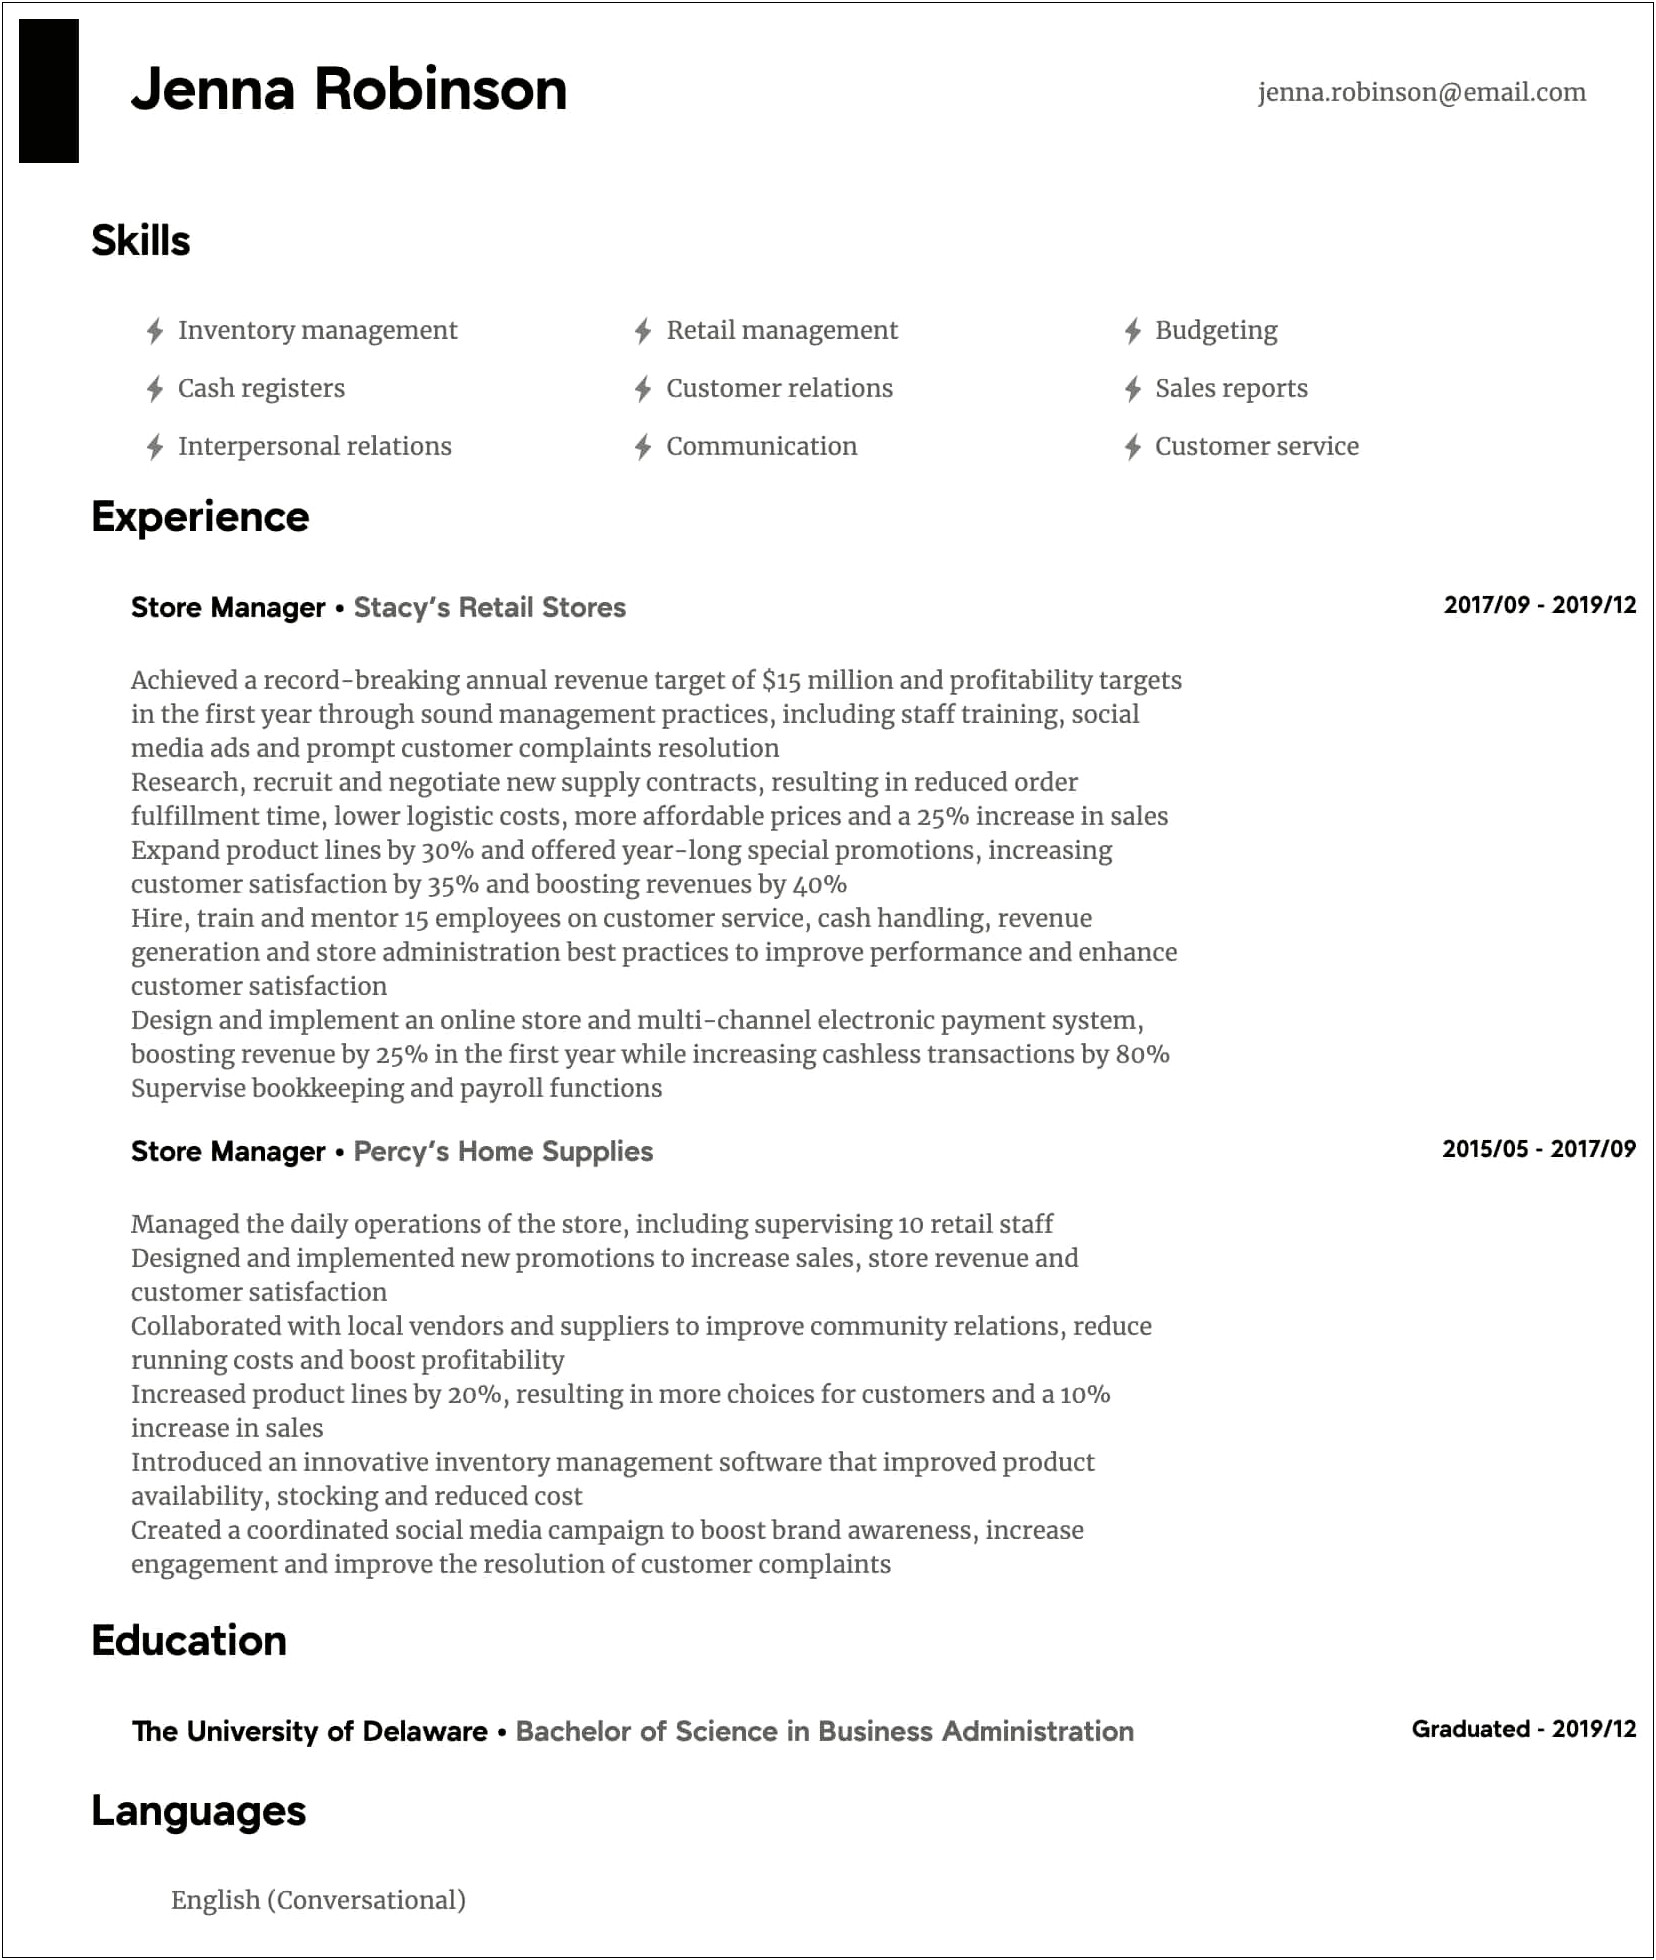 Retail Clothing Store Manager Resume Sample